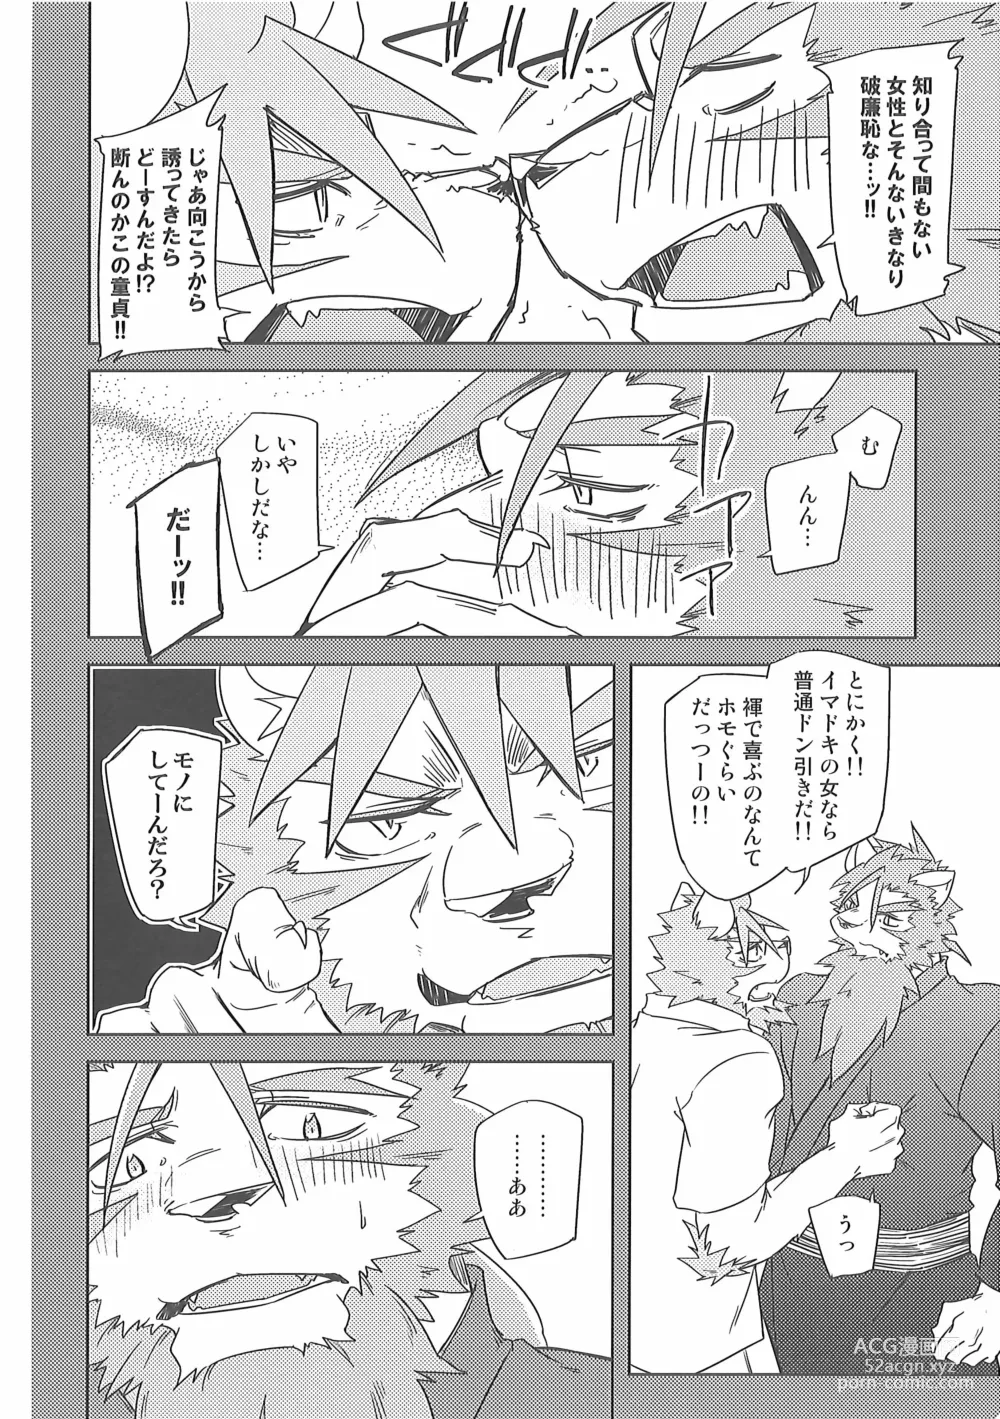 Page 12 of doujinshi Water under The Bridge 1